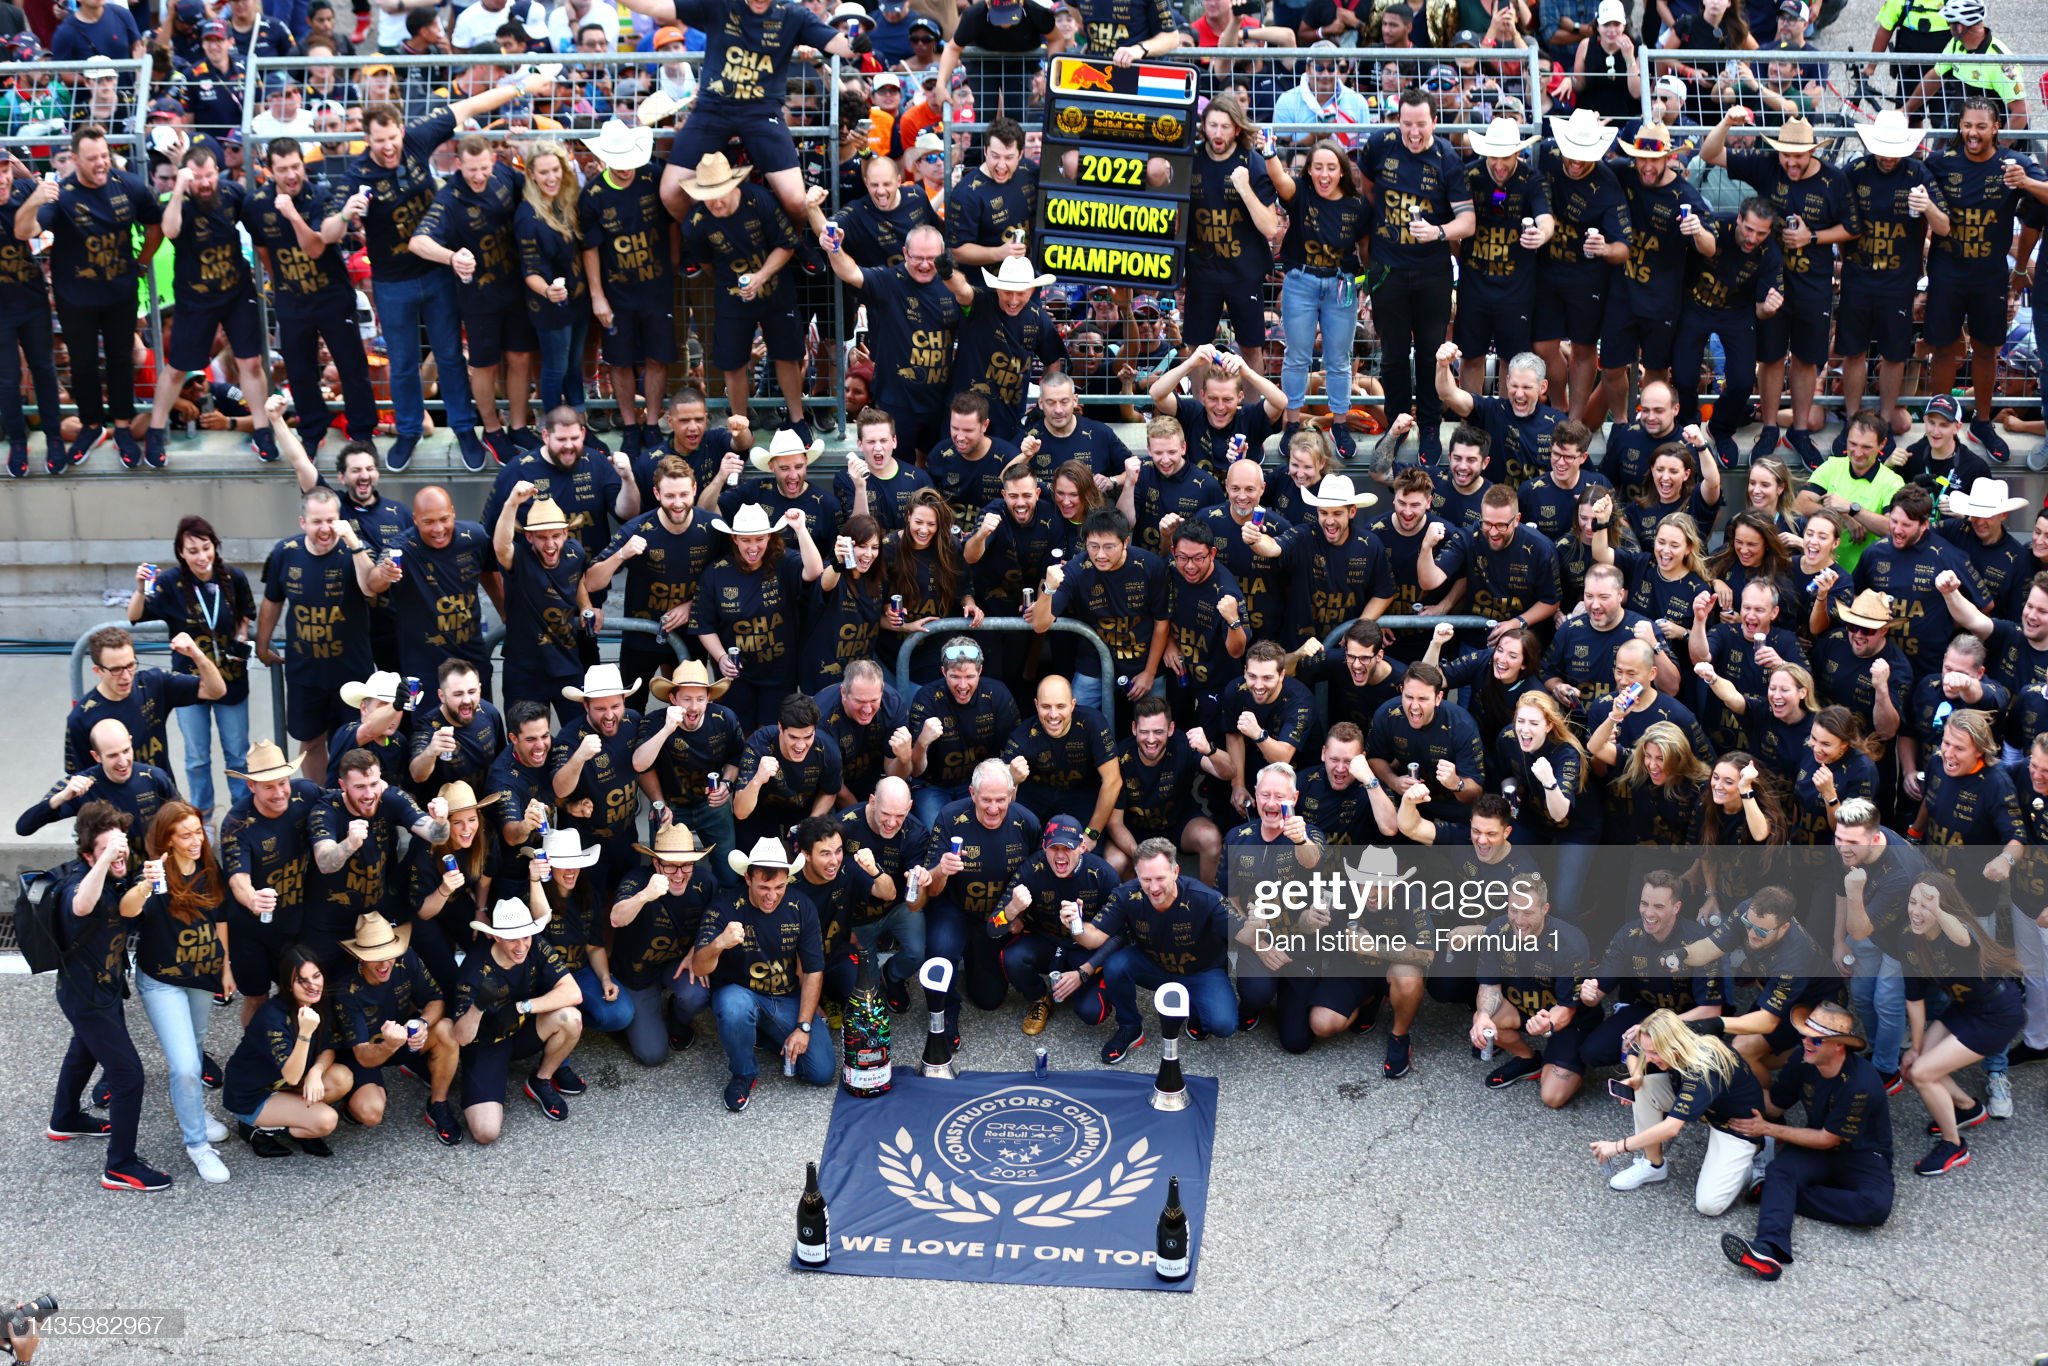 Max Verstappen celebrates winning the F1 World Constructors Championship with his team.